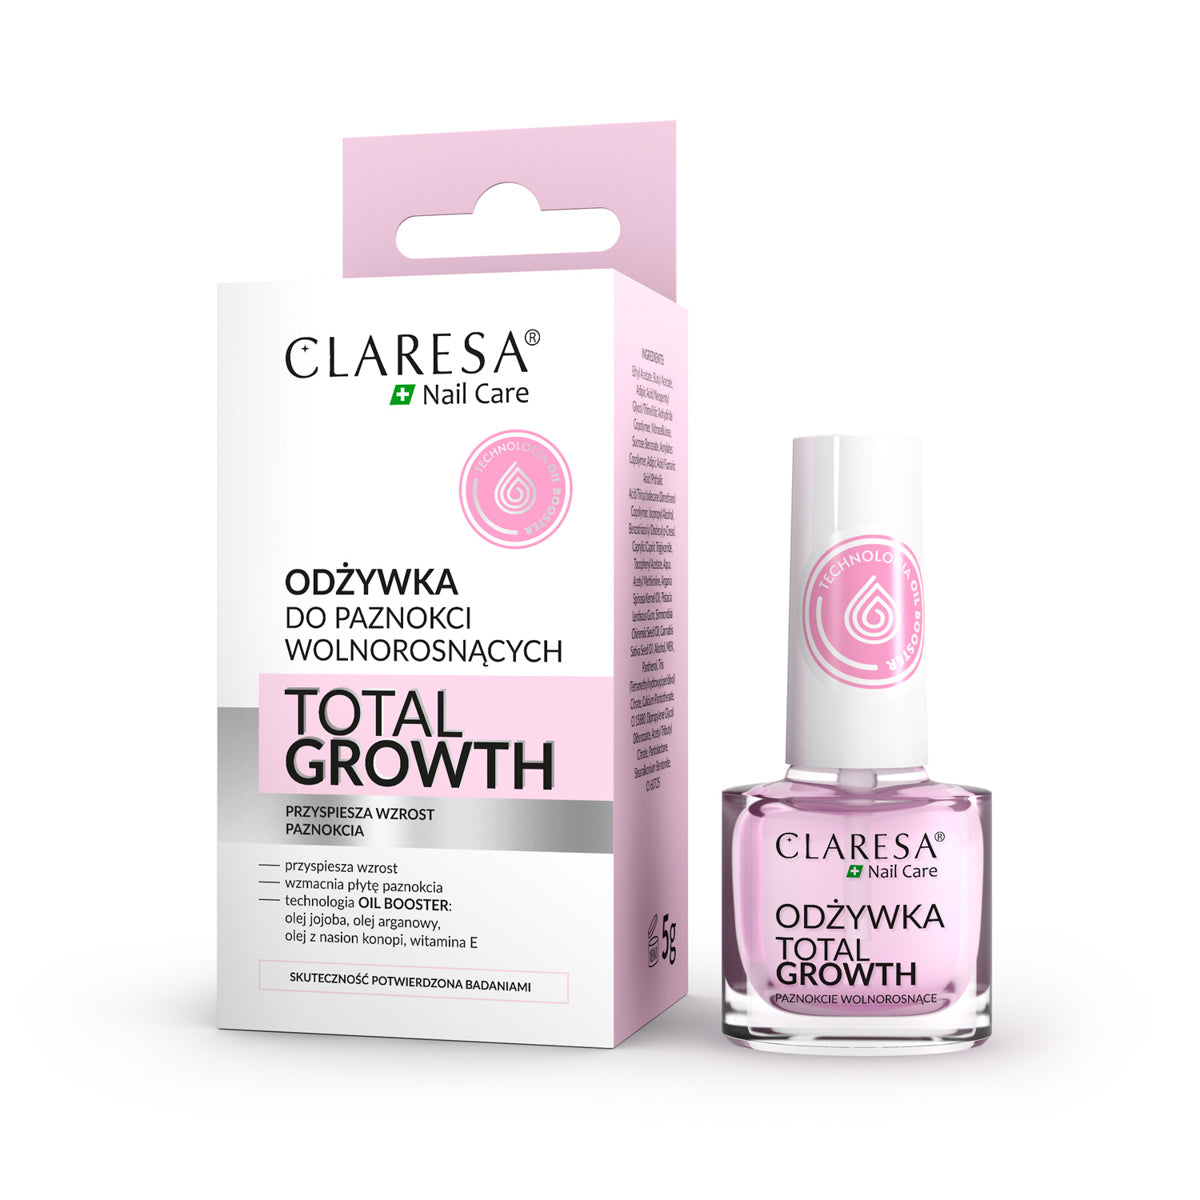 CLARESA Total Growth après-shampoing pour ongles 5 g